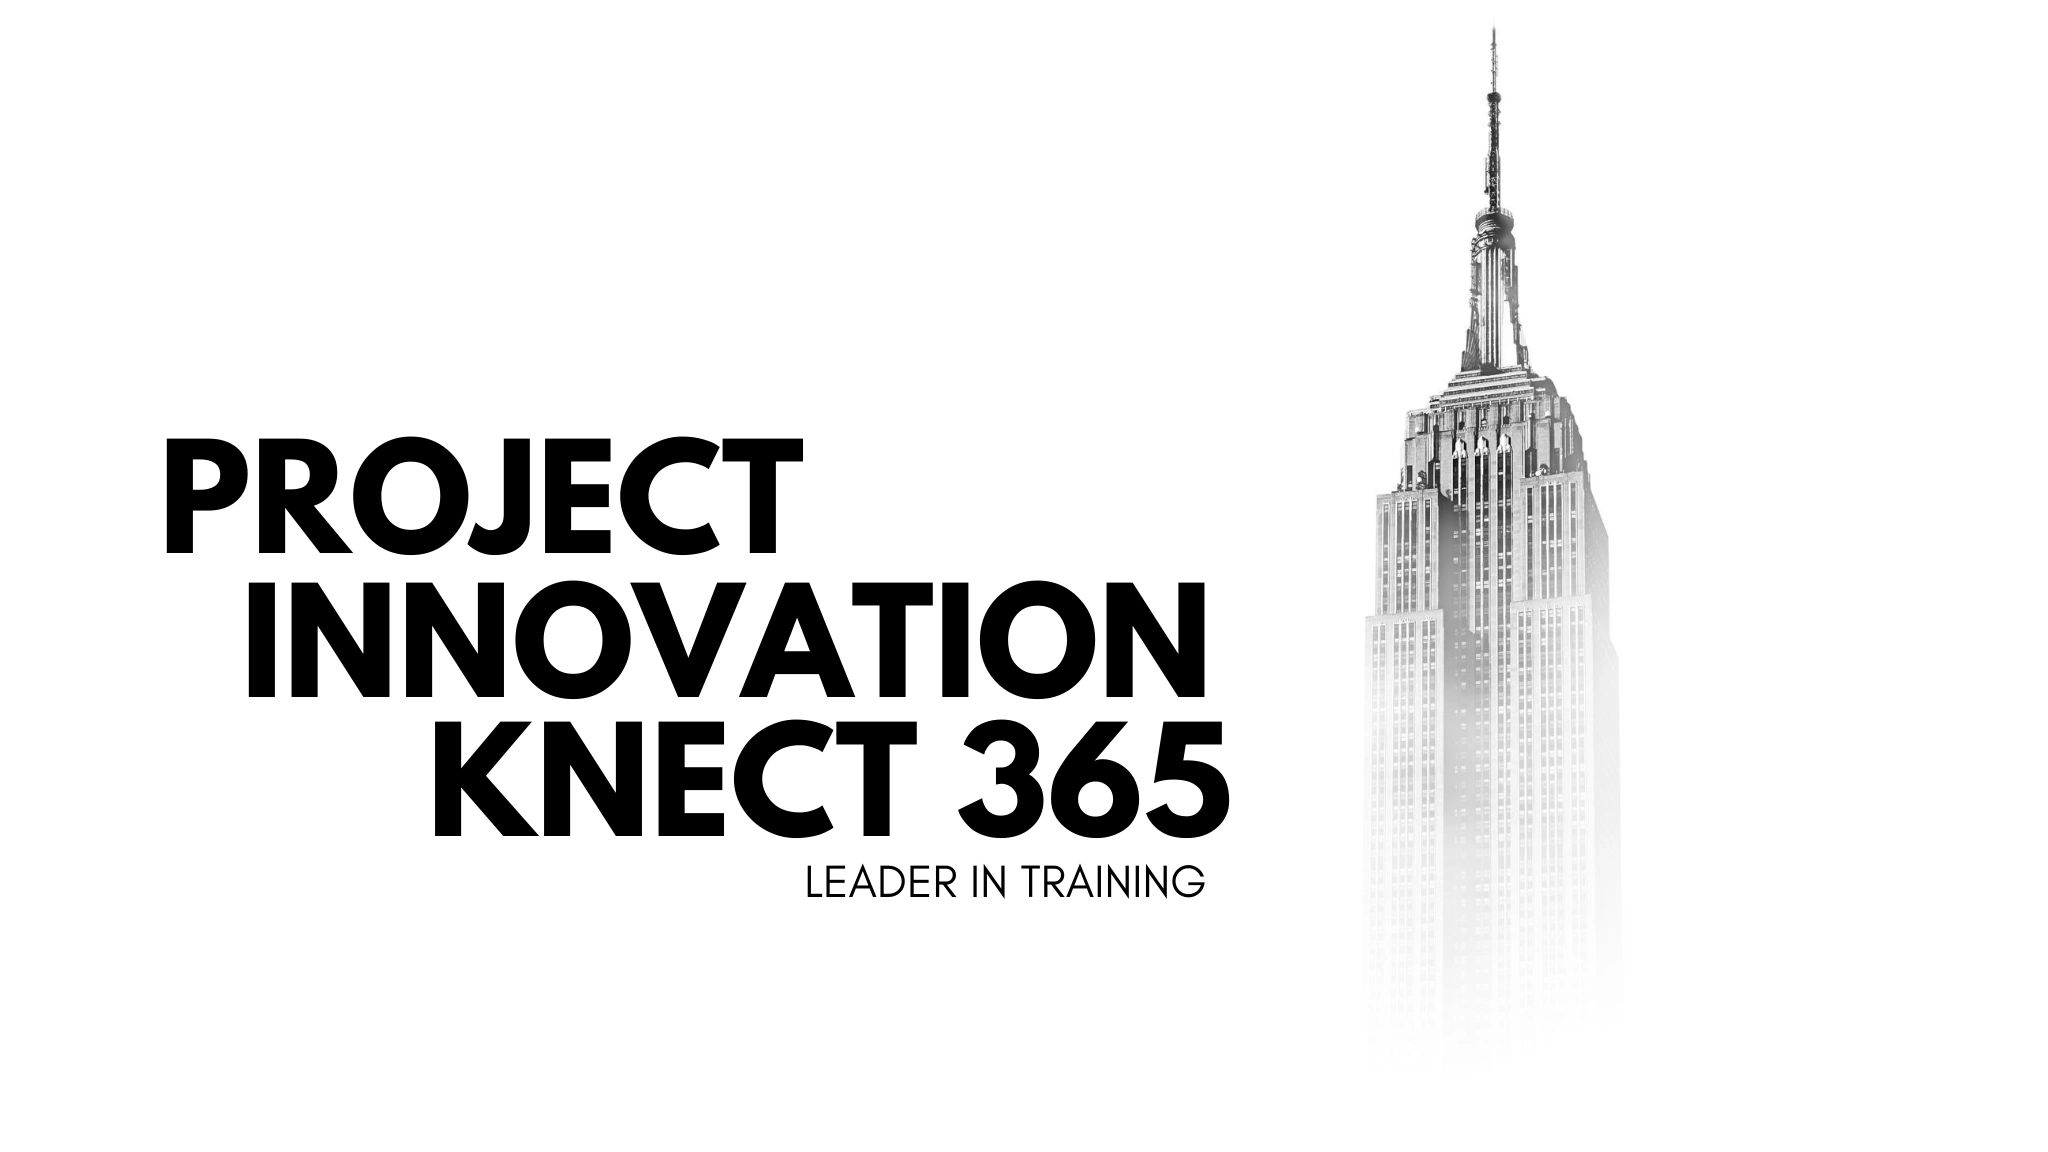 Project Innovation Knect 365
Leader in Training 
Project Innovation Knect 365, Giving  pro Edge